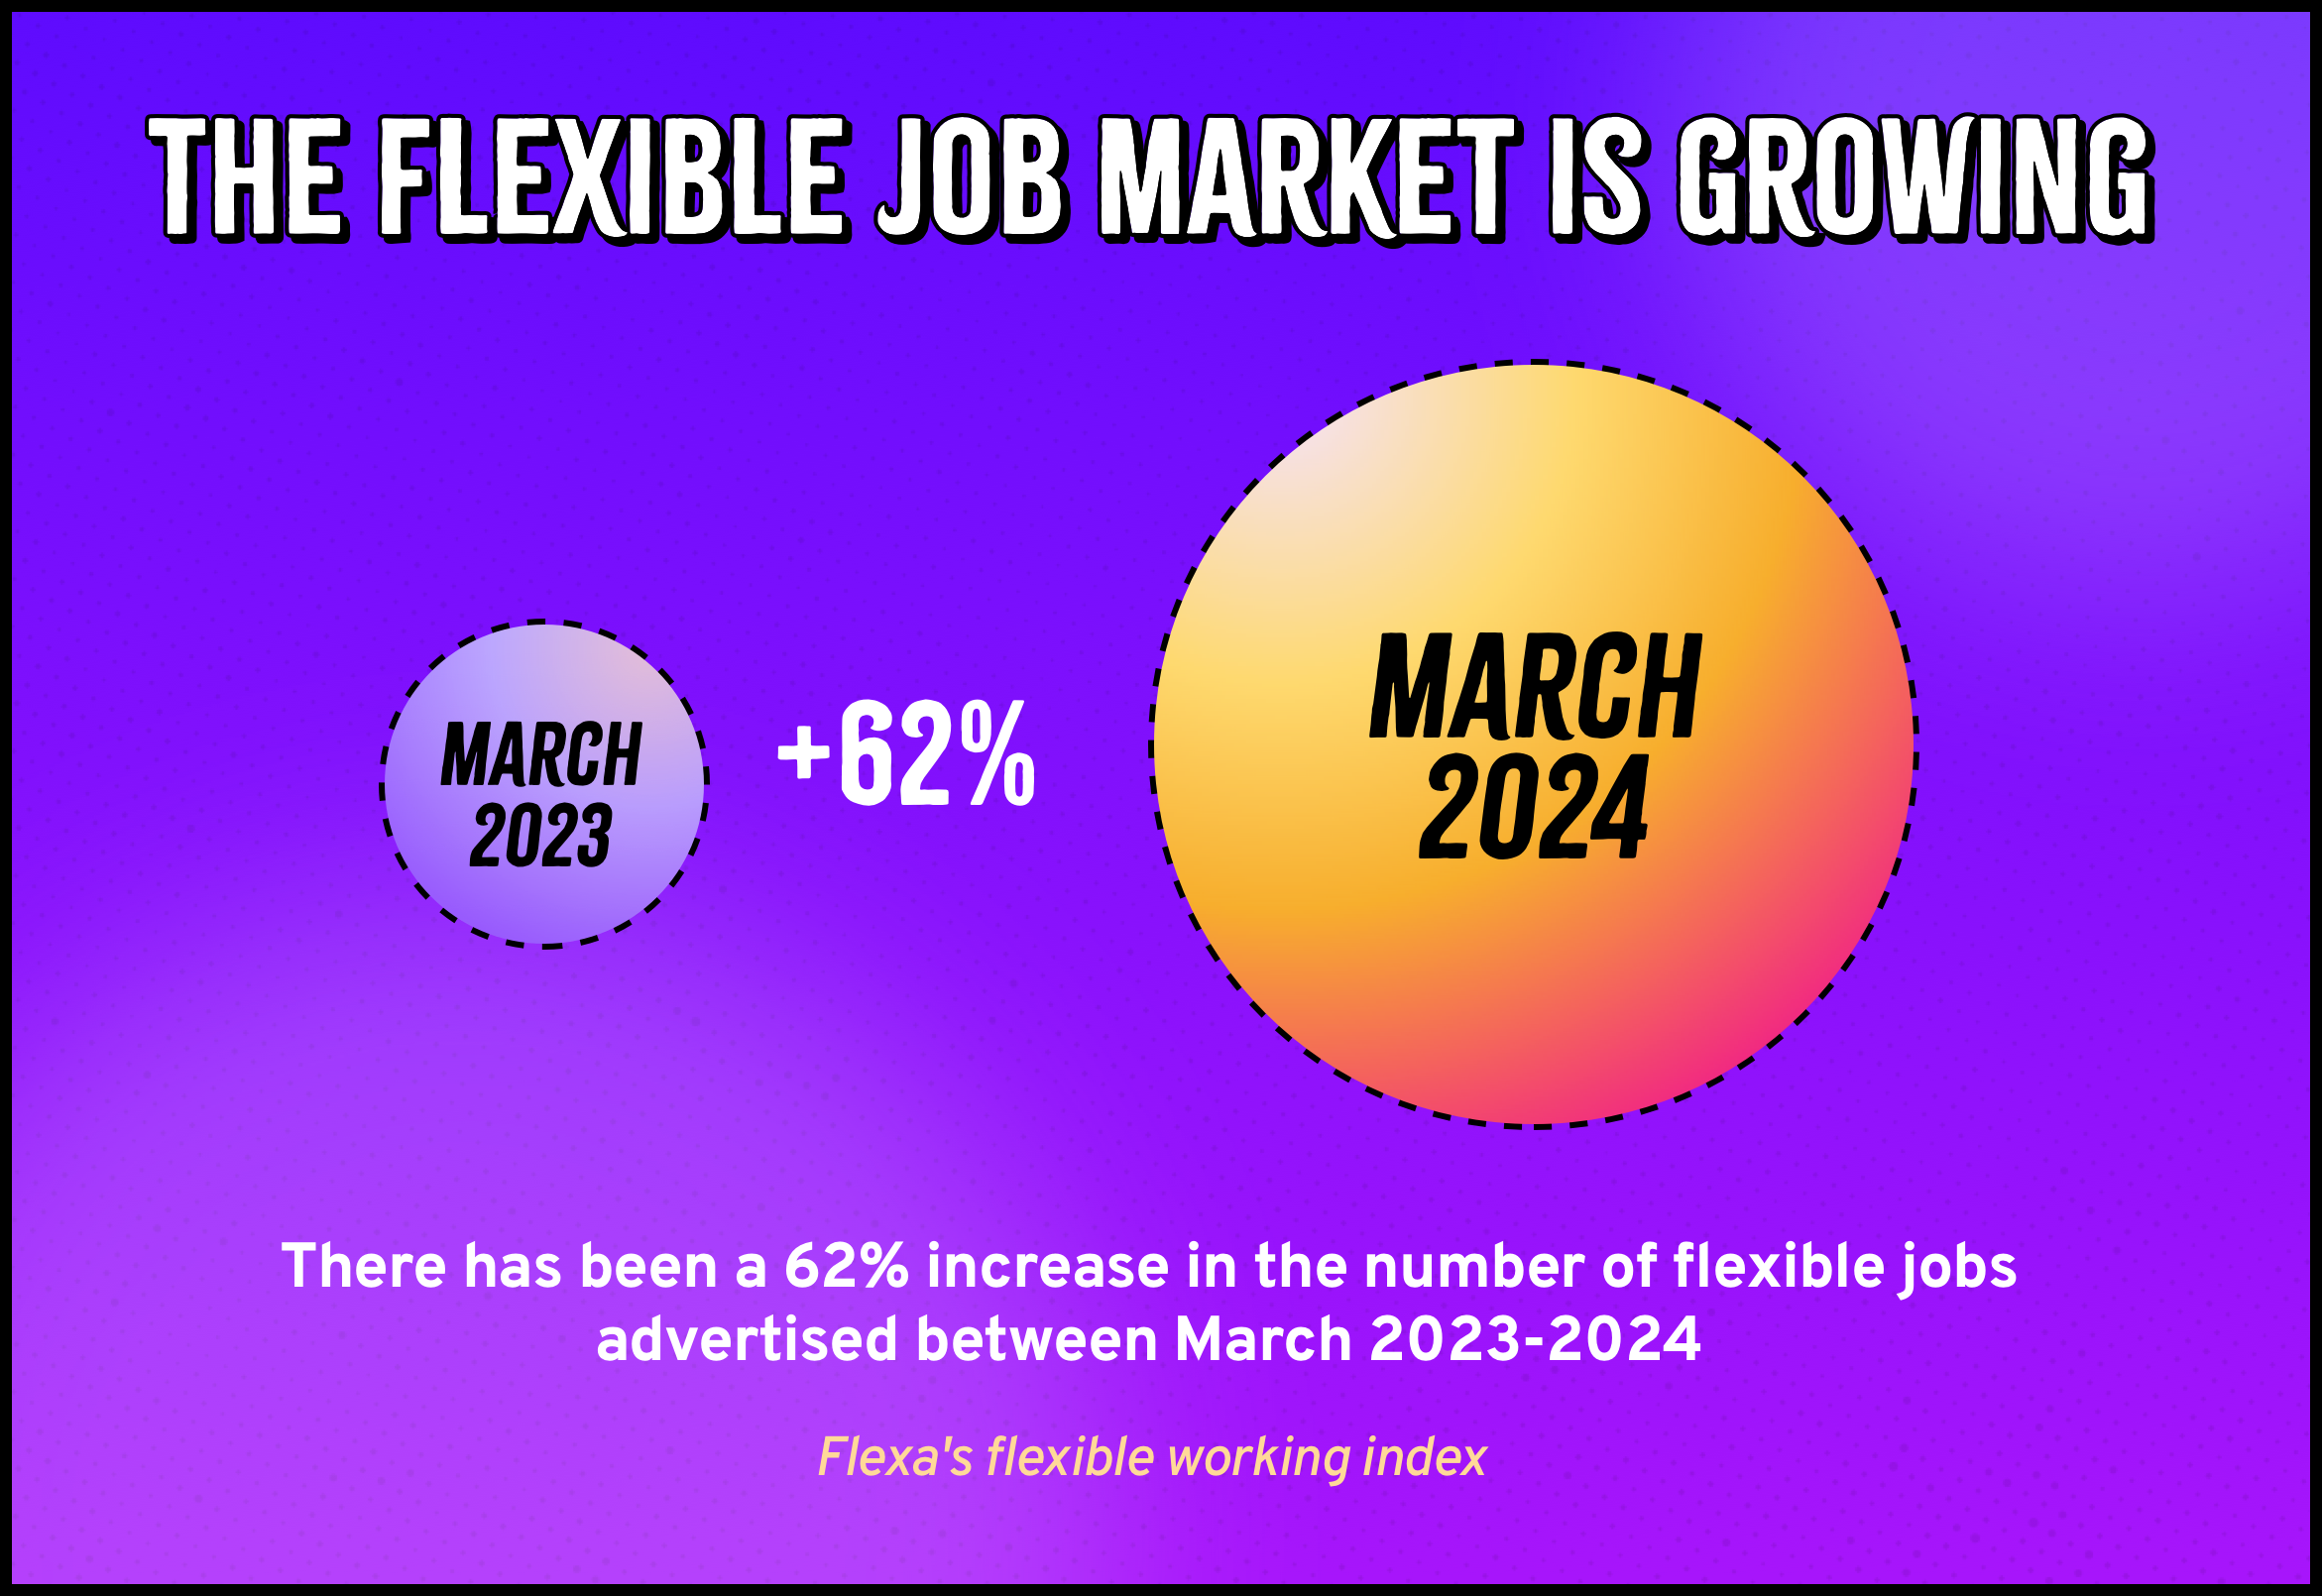 Image shows an increase of 62% in flexible jobs from March 2023 to March 2024